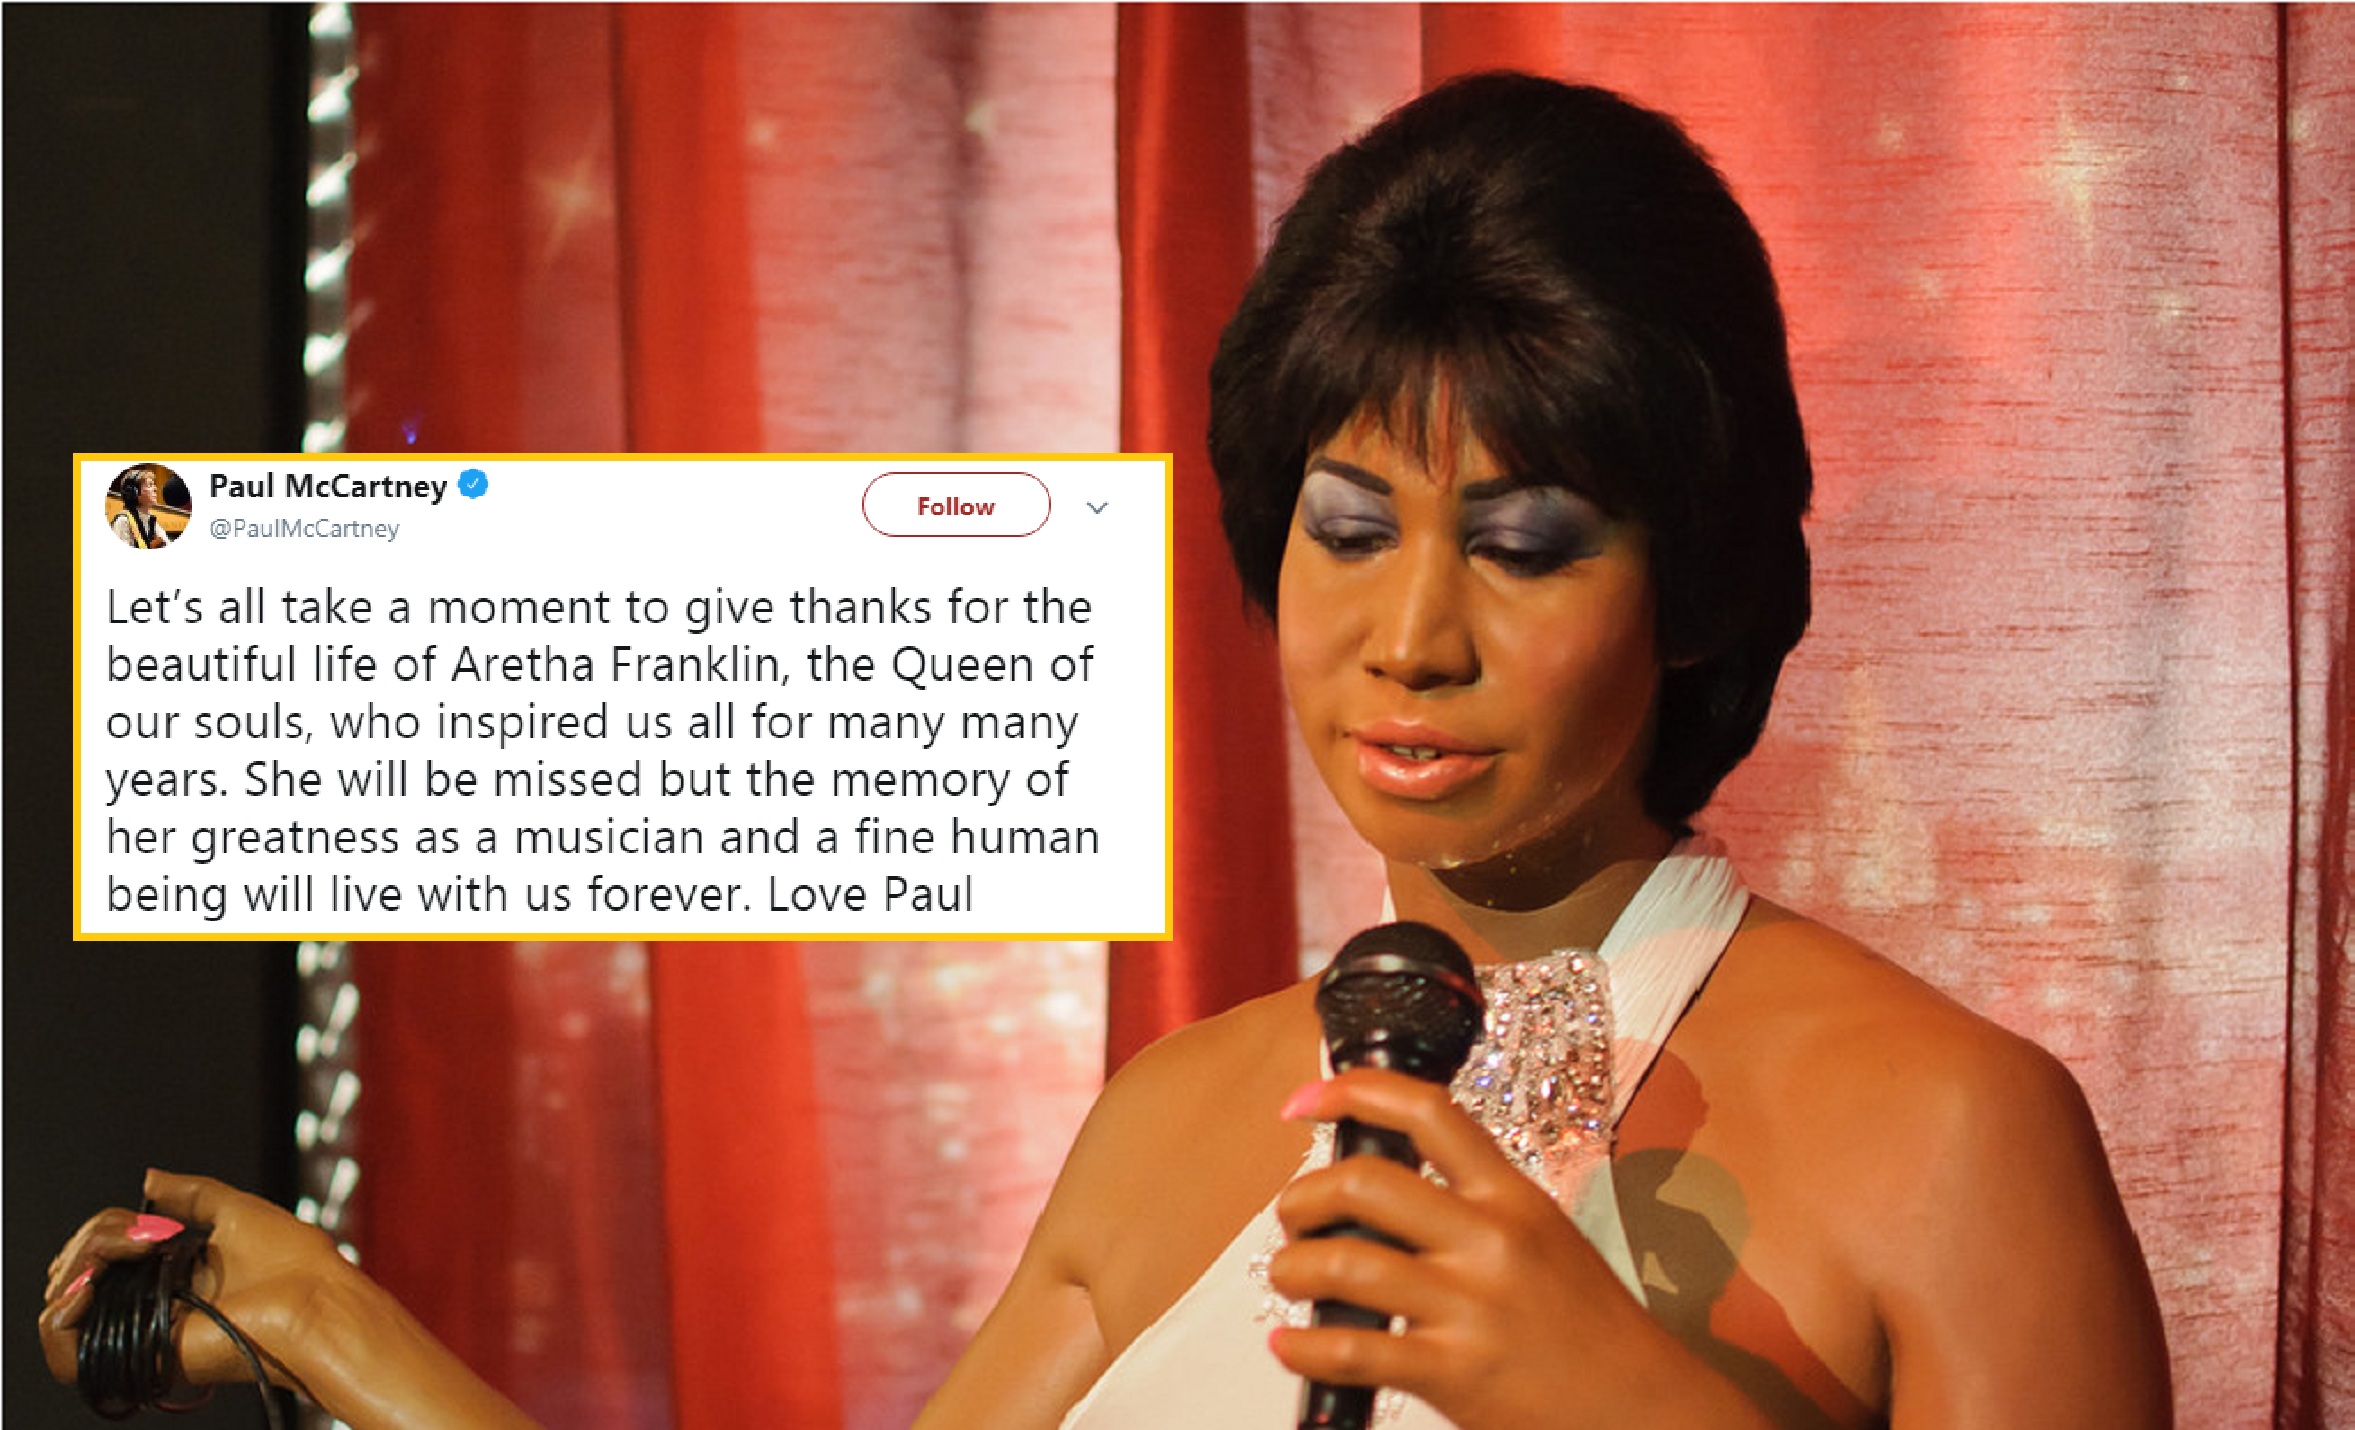 From Obama to Paul McCartney, here is how everyone reacted to Aretha Franklin’s passing